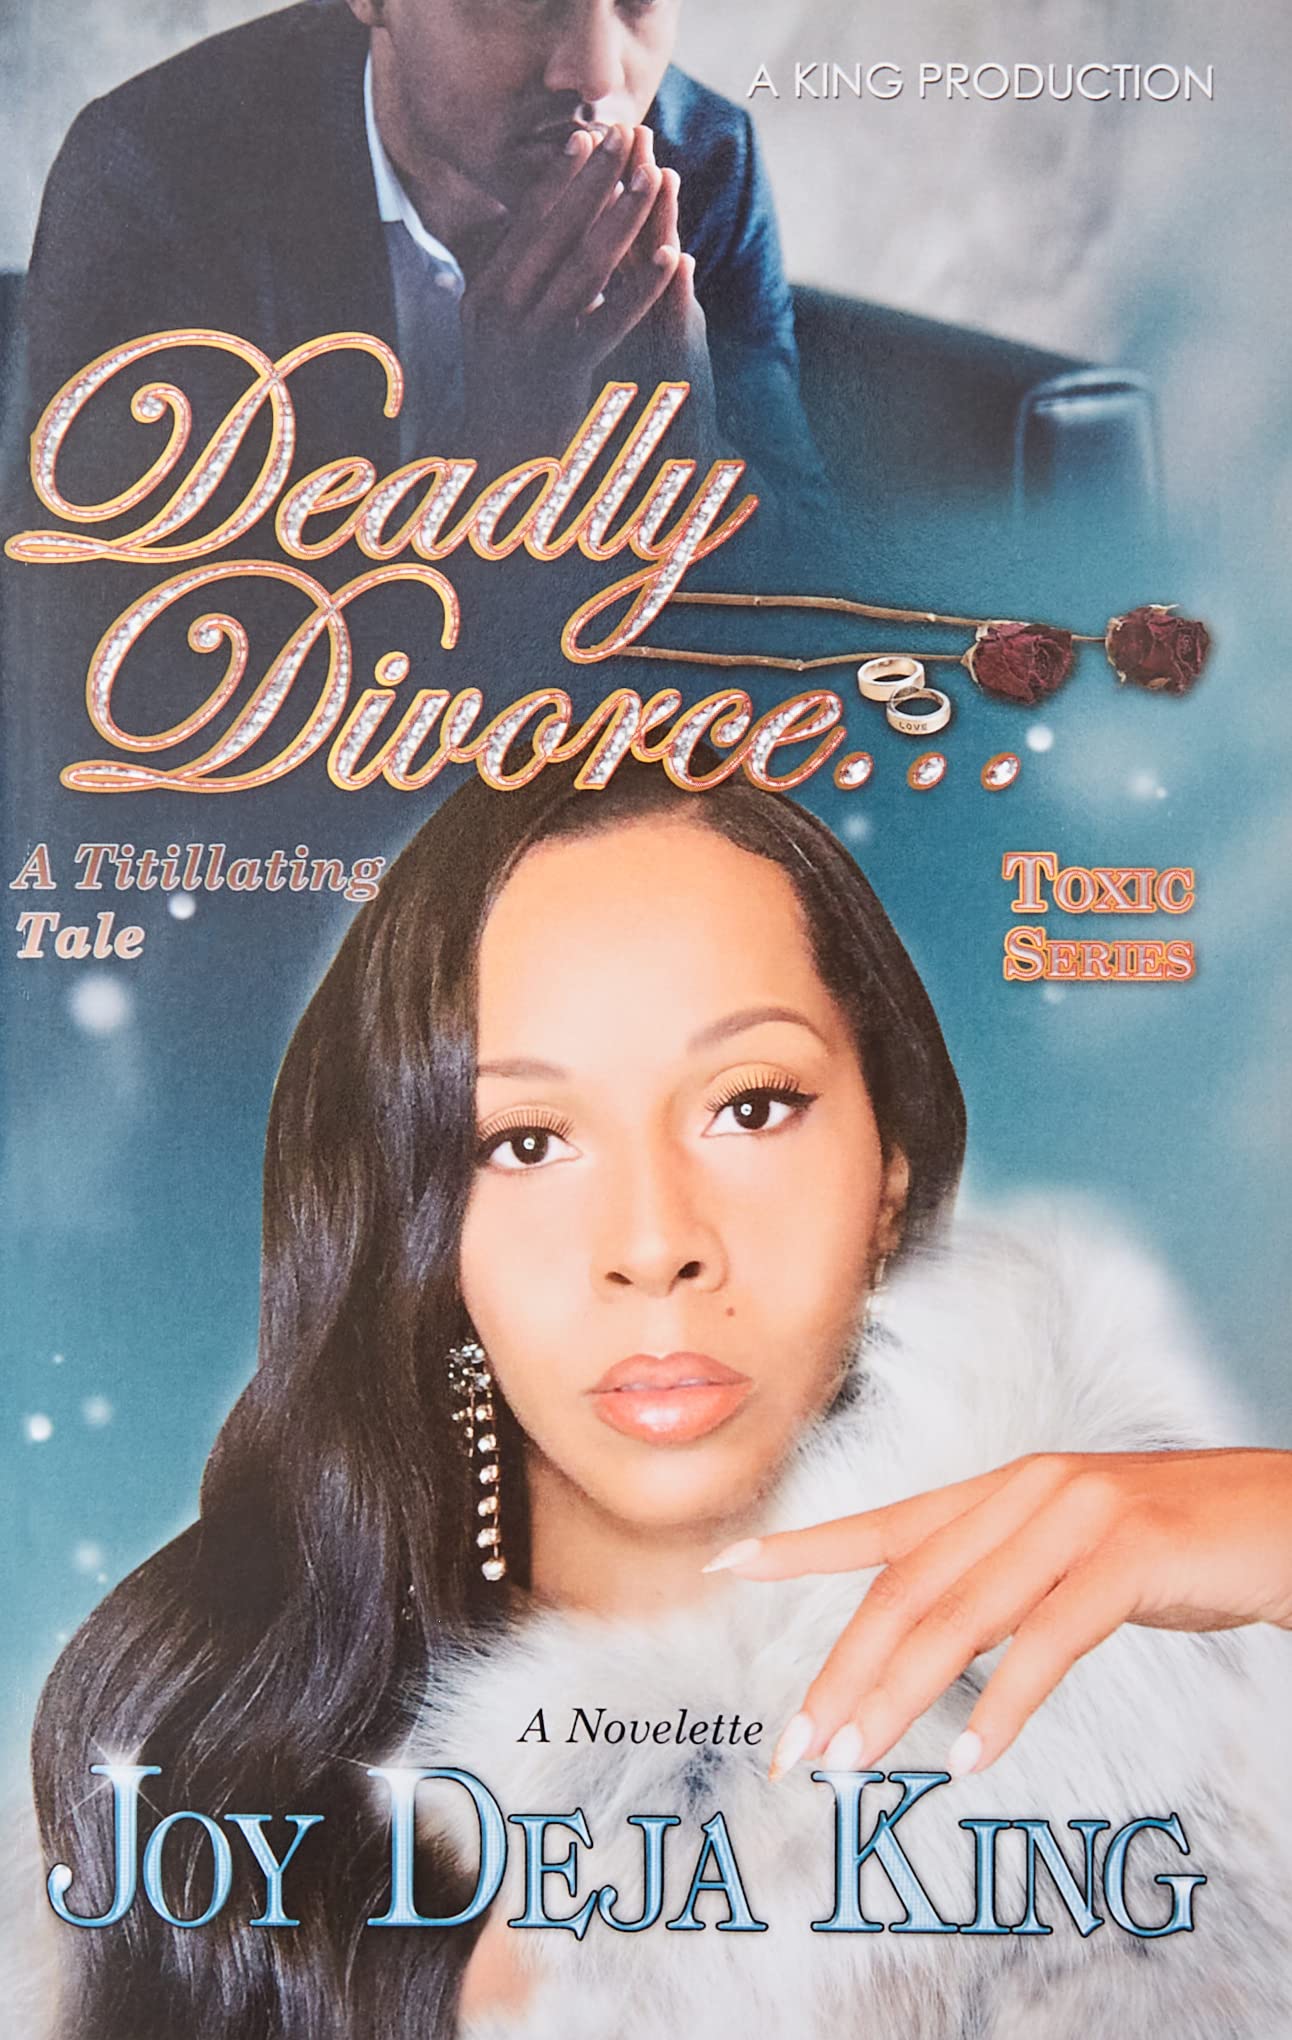 Deadly Divorce...A Titillating Tale SureShot Books